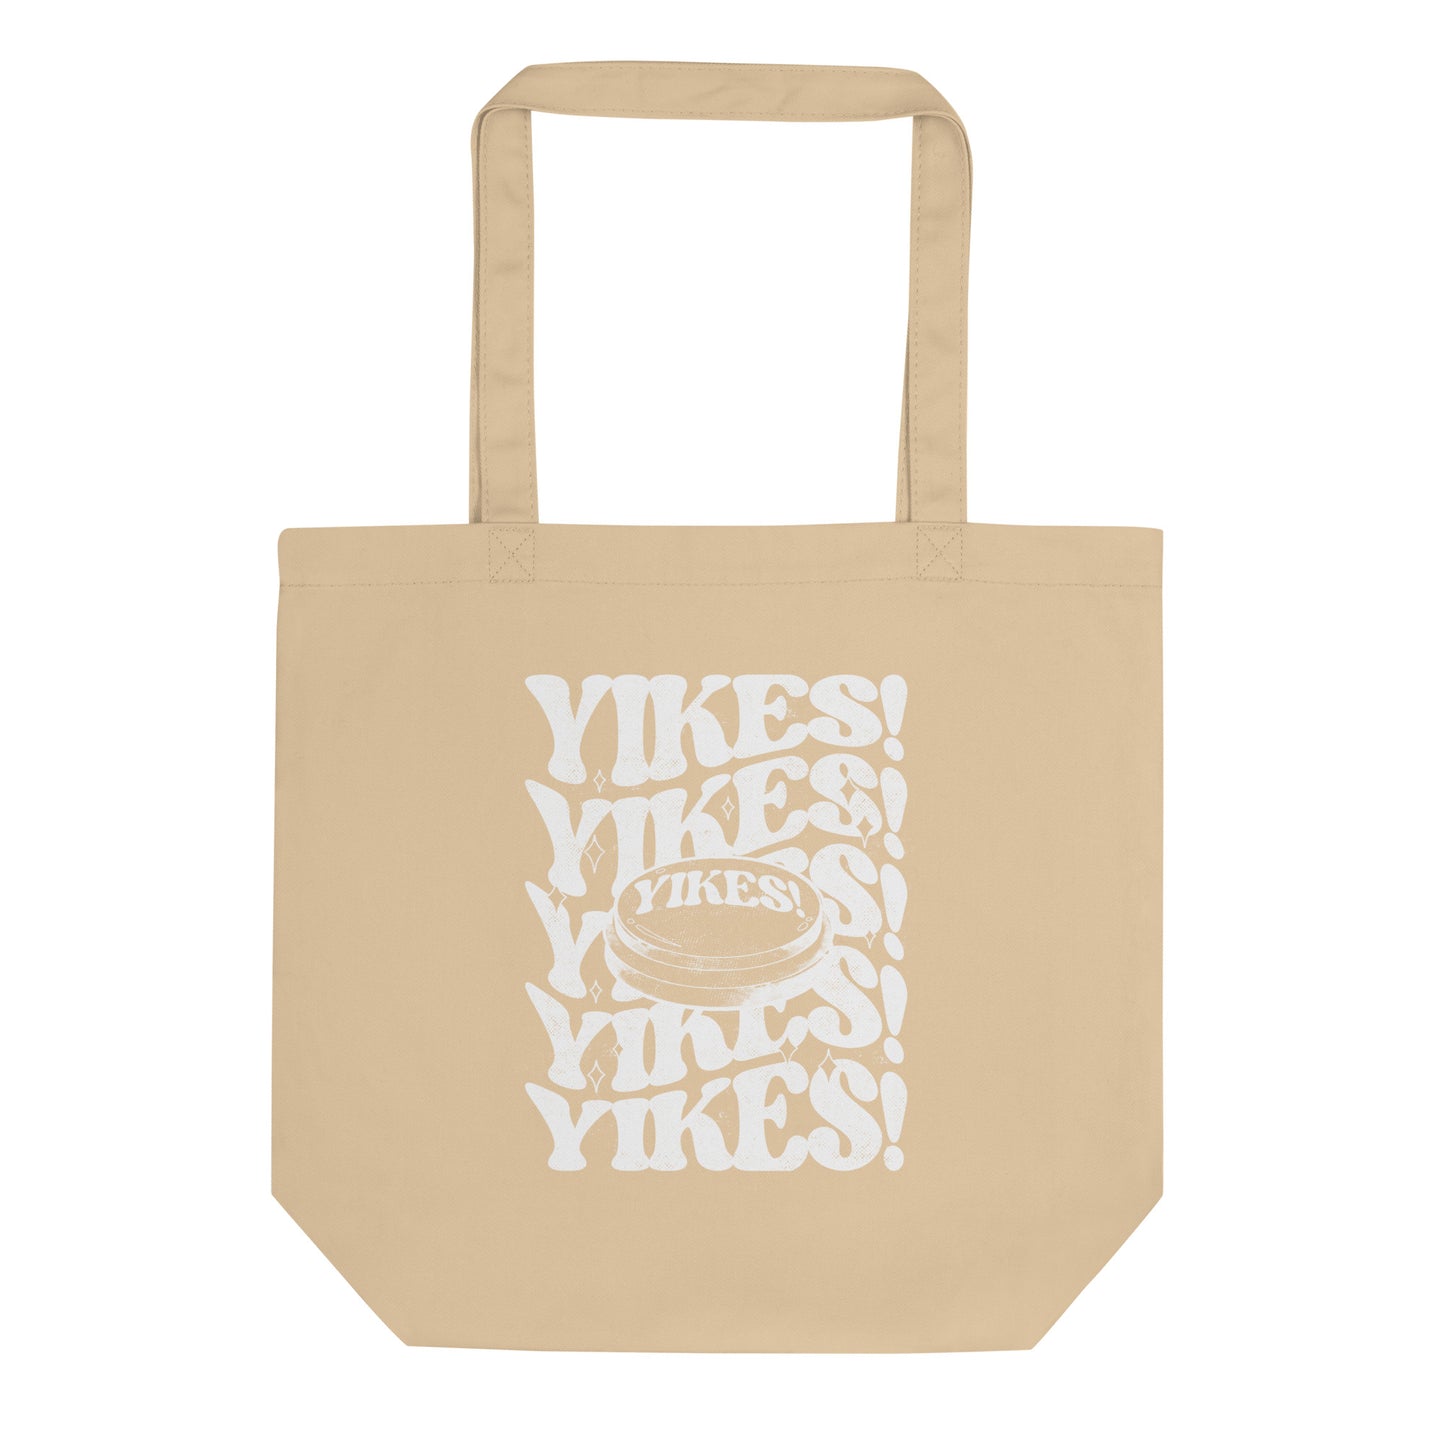 YIKES! Tote